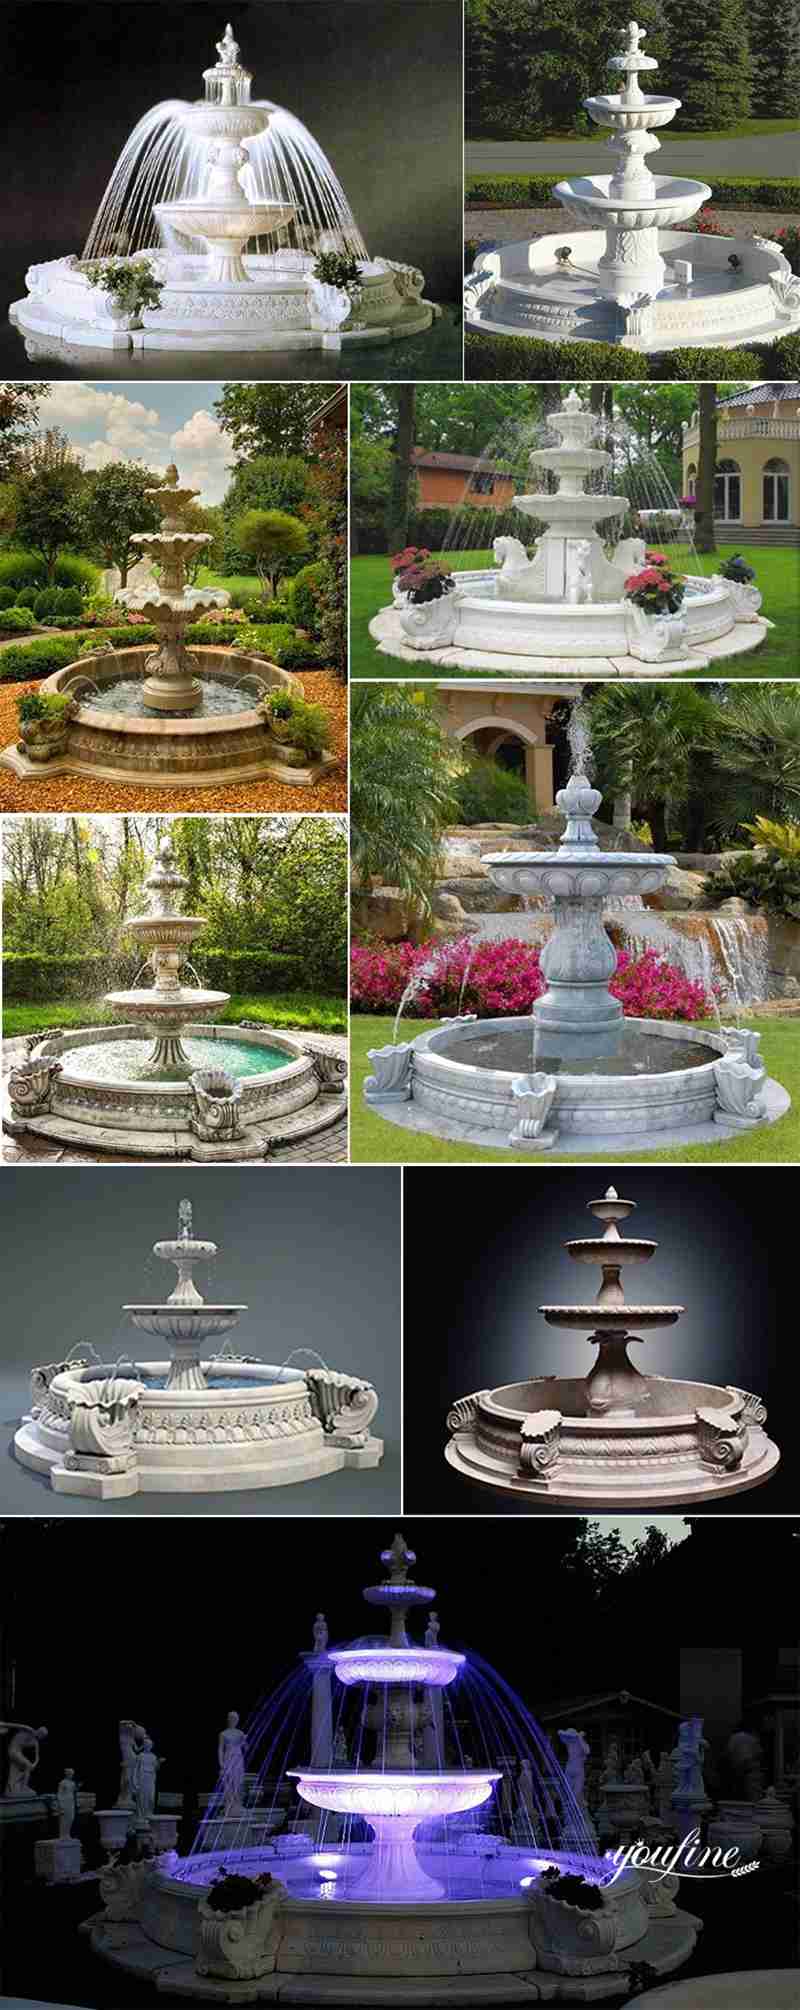 horse fountains for sale -YouFine Sculpture